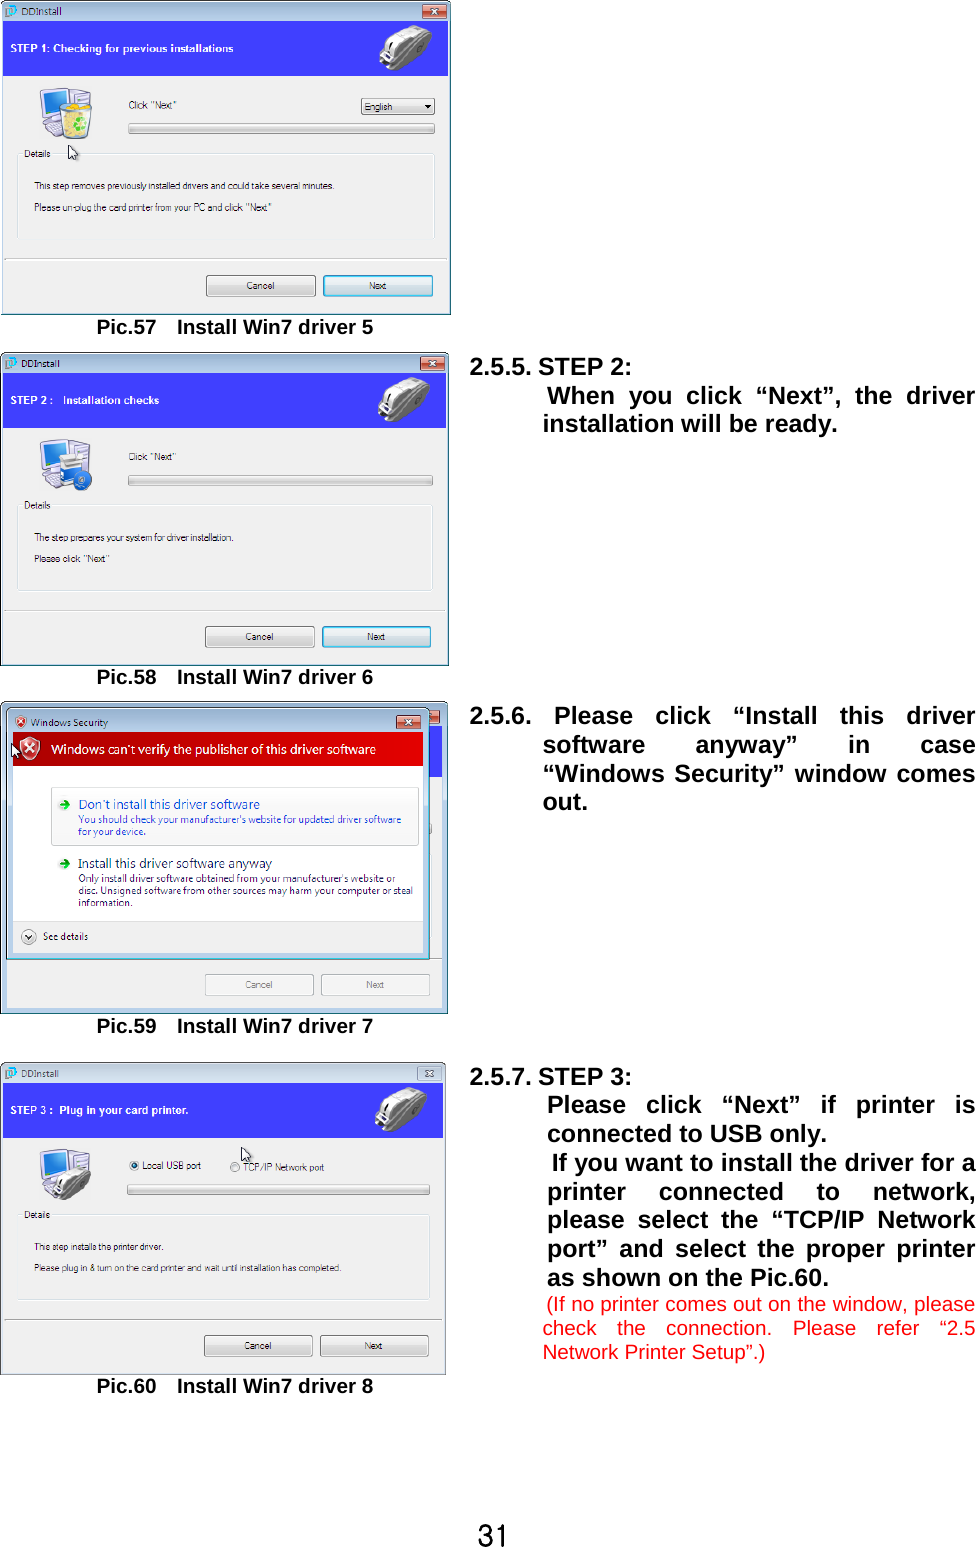 ZXPic.57 Install Win7 driver 5Pic.58 Install Win7 driver 62.5.5.STEP 2:When you click “Next”, the driverinstallation will be ready.Pic.59 Install Win7 driver 72.5.6. Please click “Install this driversoftware anyway” in case“Windows Security” window comesout.Pic.60 Install Win7 driver 82.5.7.STEP 3:Please click “Next” if printer isconnected to USB only.If you want to install the driver for aprinter connected to network,please select the “TCP/IP Networkport” and select the proper printeras shown on the Pic.60.(If no printer comes out on the window, pleasecheck the connection. Please refer “2.5Network Printer Setup”.)